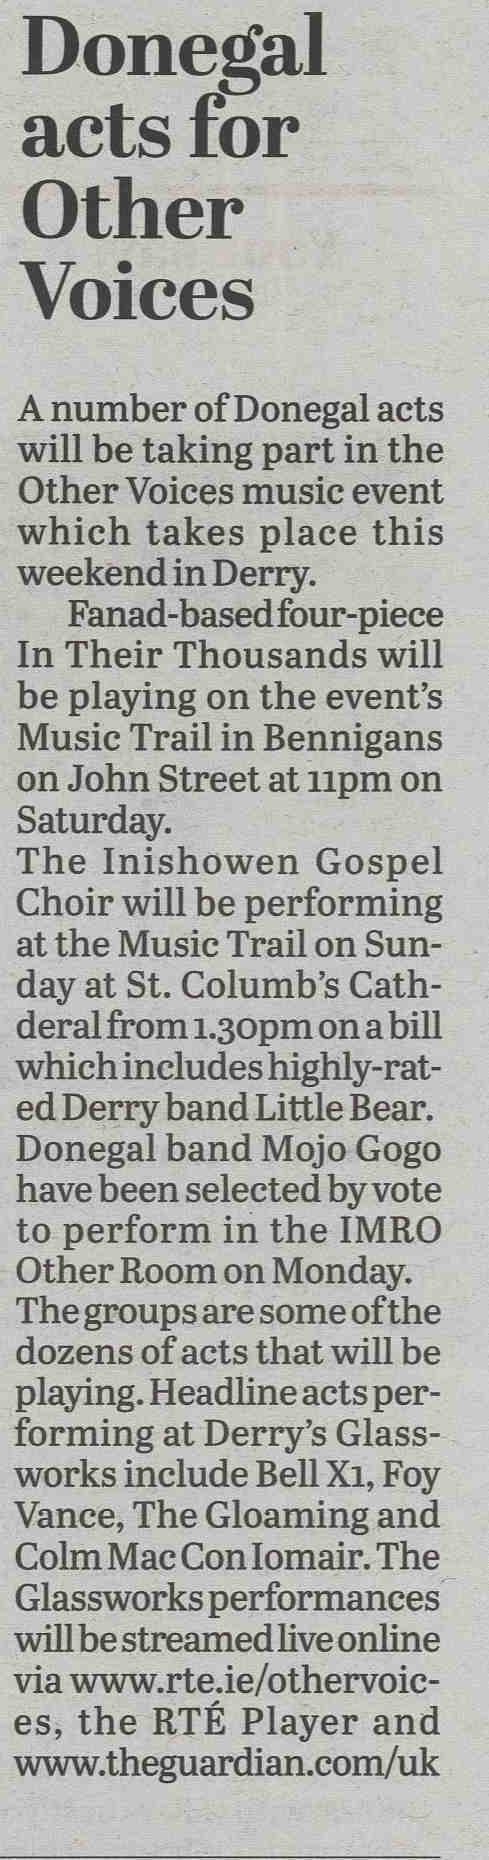 The Inishowen Gospel Choir will be performing at the Music Trail on Sunday at St. Columb's Cathderal from 1.30pm on a bill which includes highly-rated Derry band Little Bear.